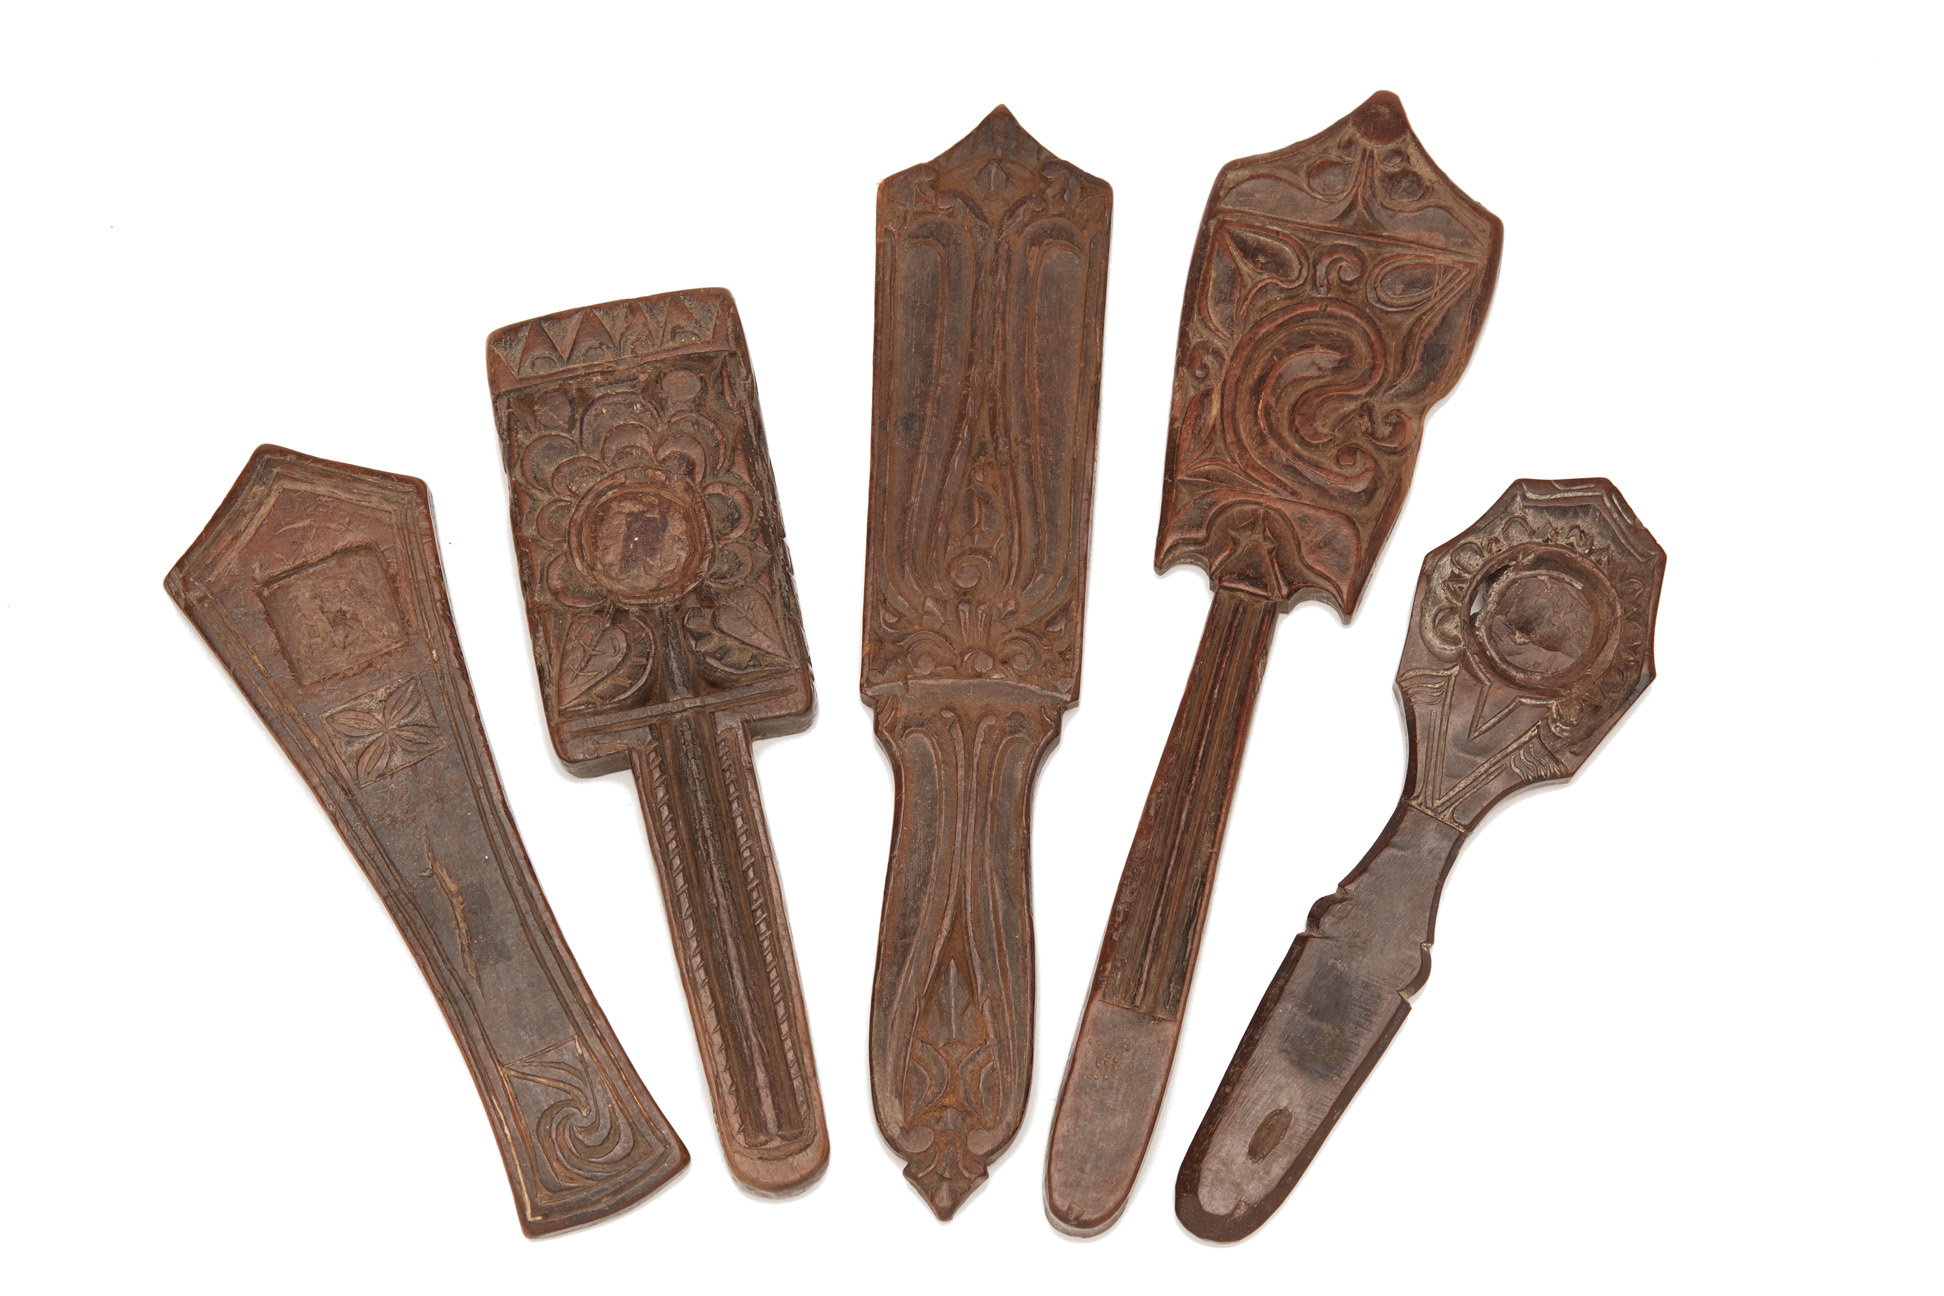 A GROUP OF INDONESIAN MEDICINE MIXING STICKS